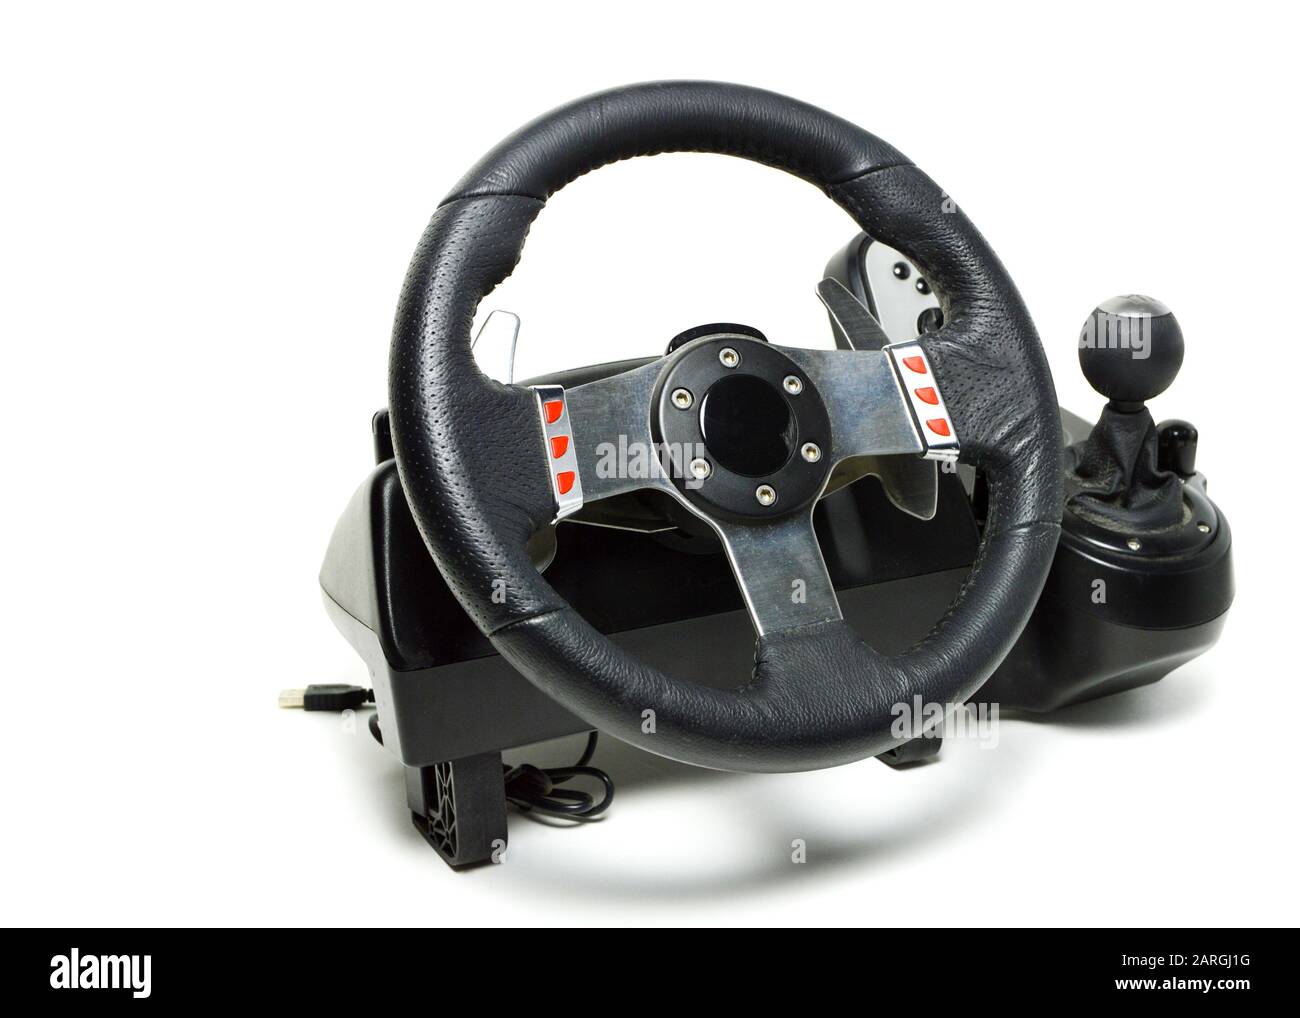 A racing wheel for the racing video games and racing simulators Stock Photo